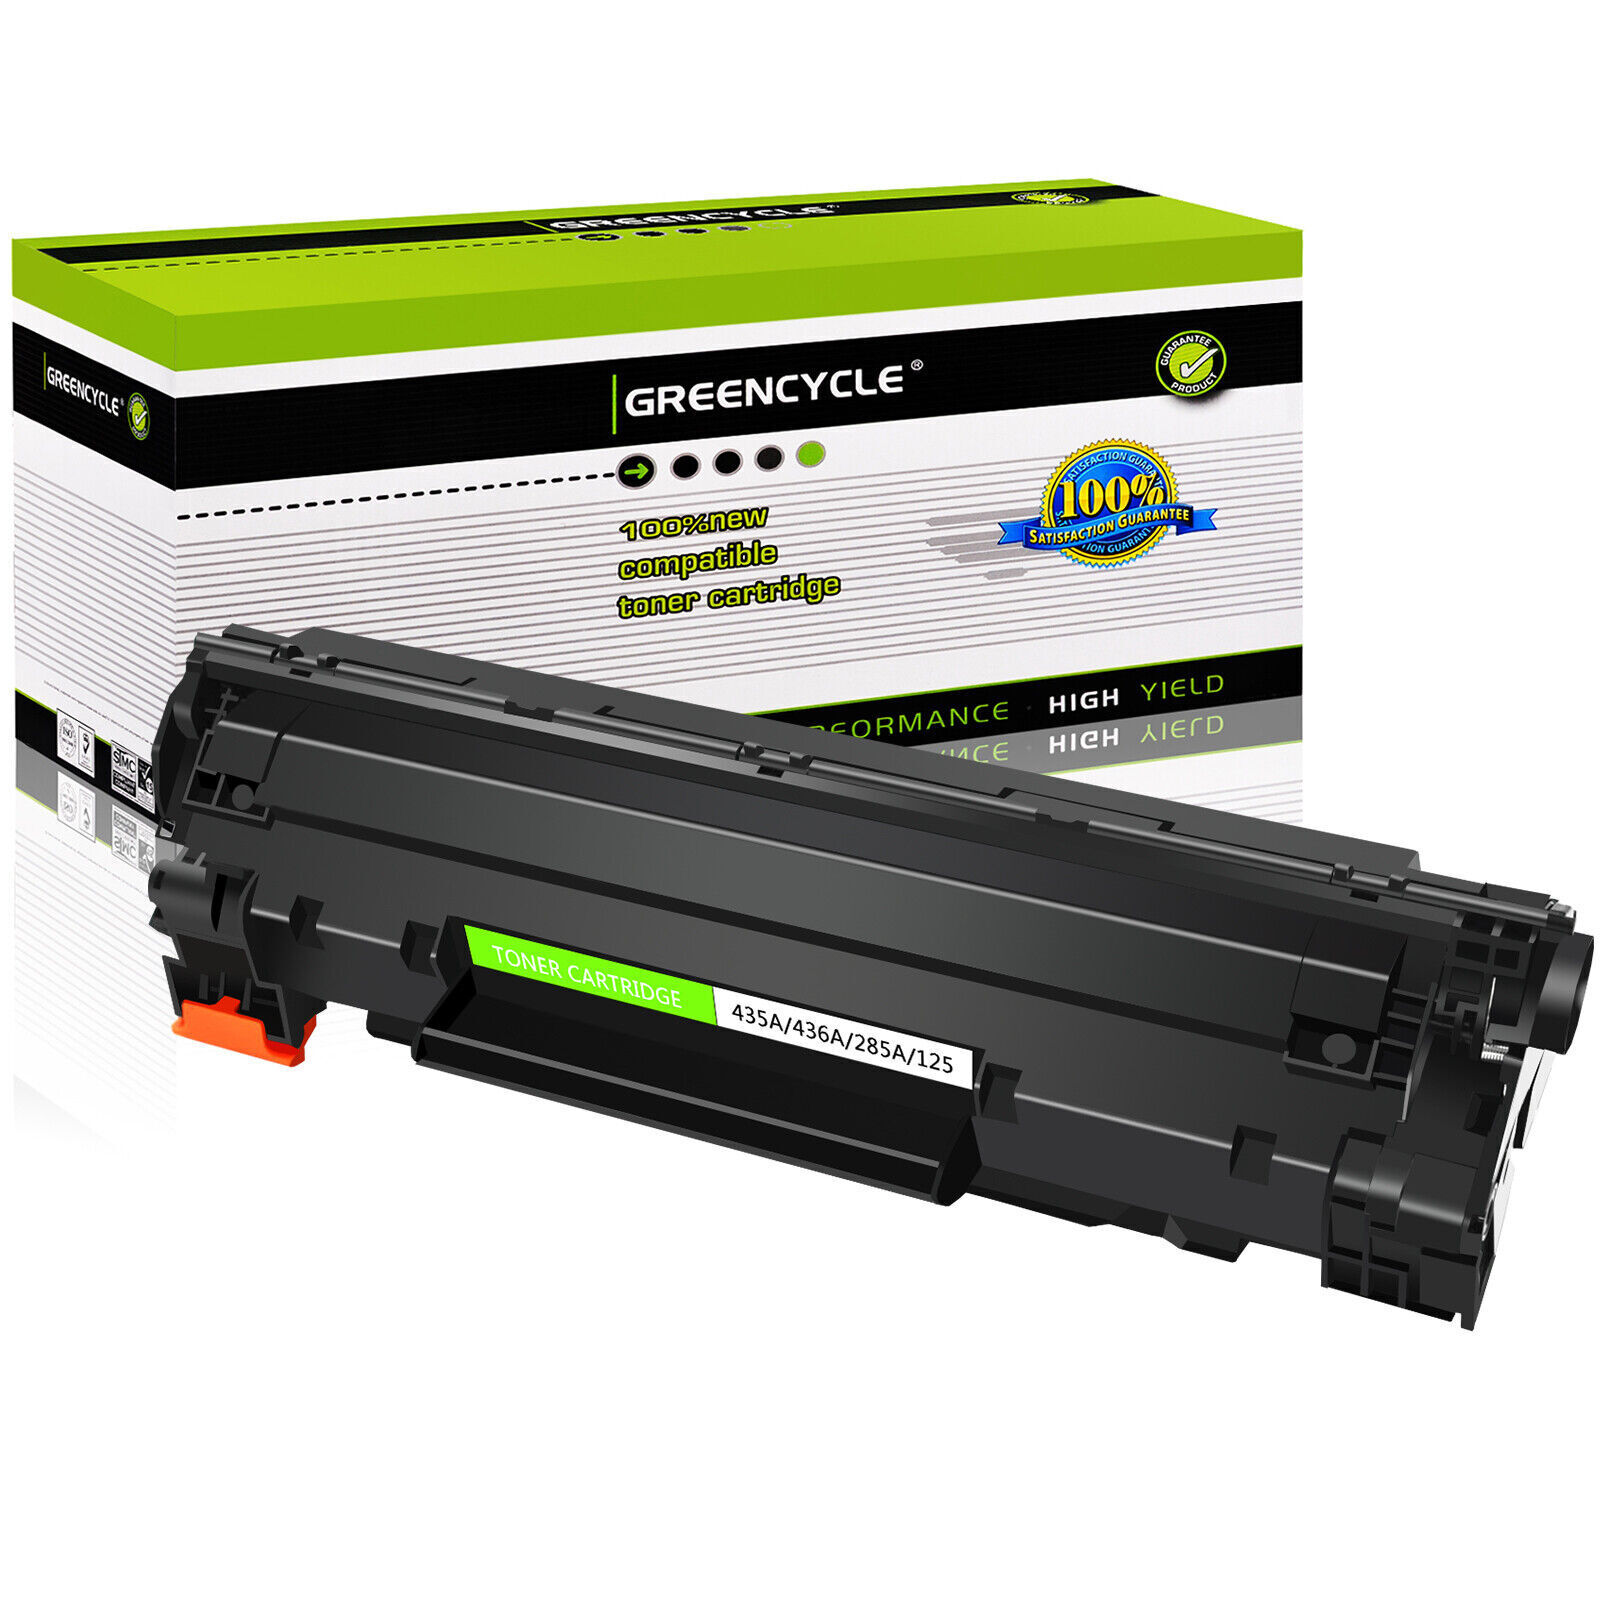 1-6PK greencycle Compatible CB435A 35A Black Laser Toner Cartridges for HP P1009